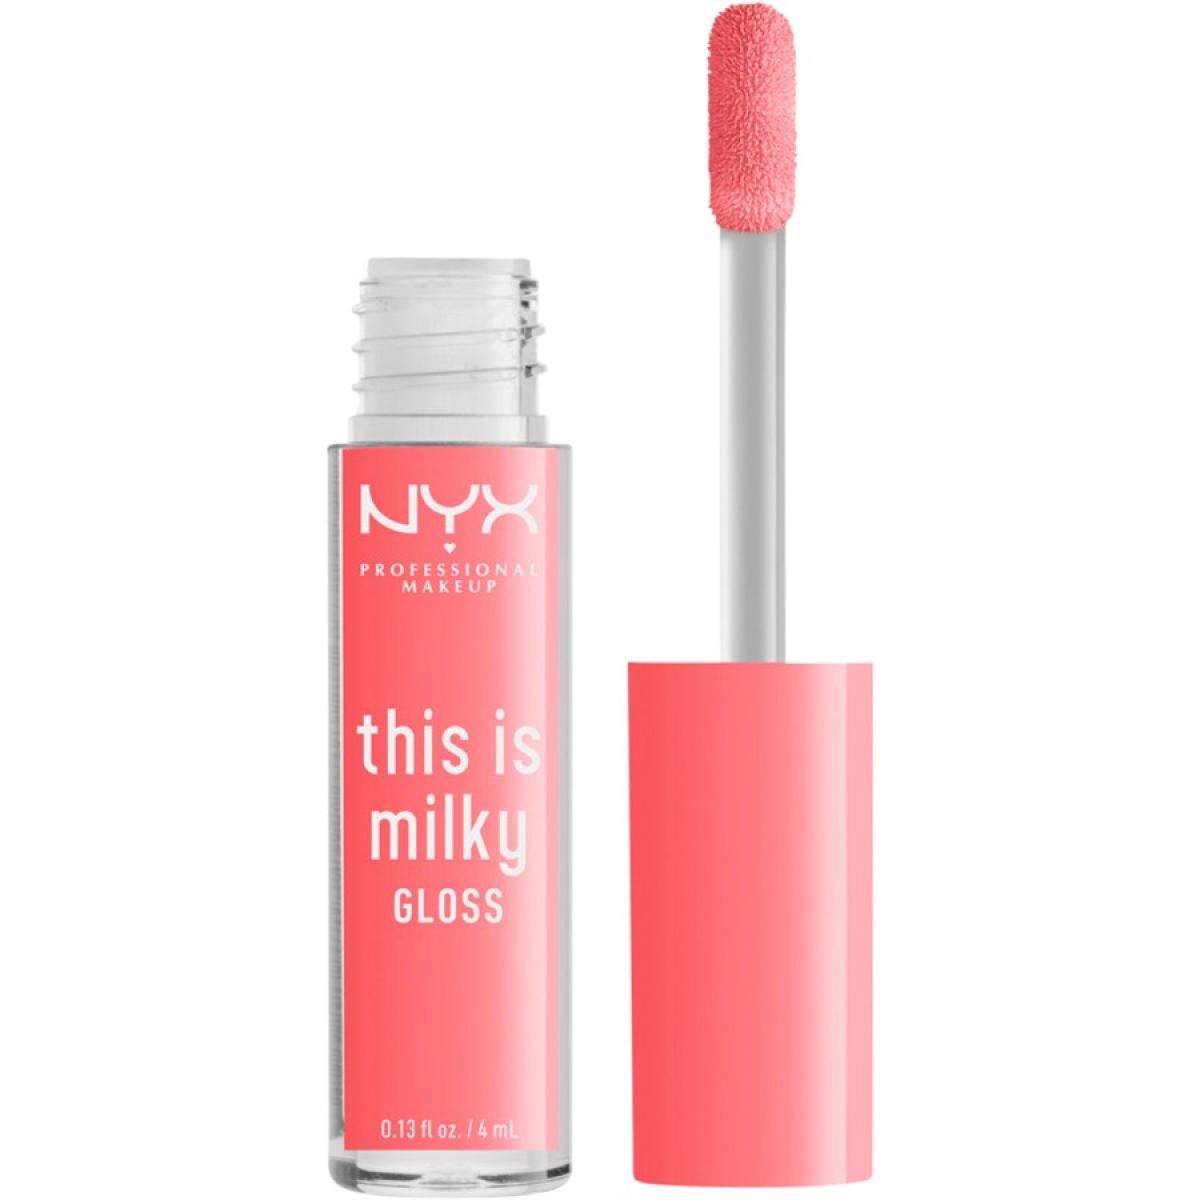 This is Milky Gloss de NYX